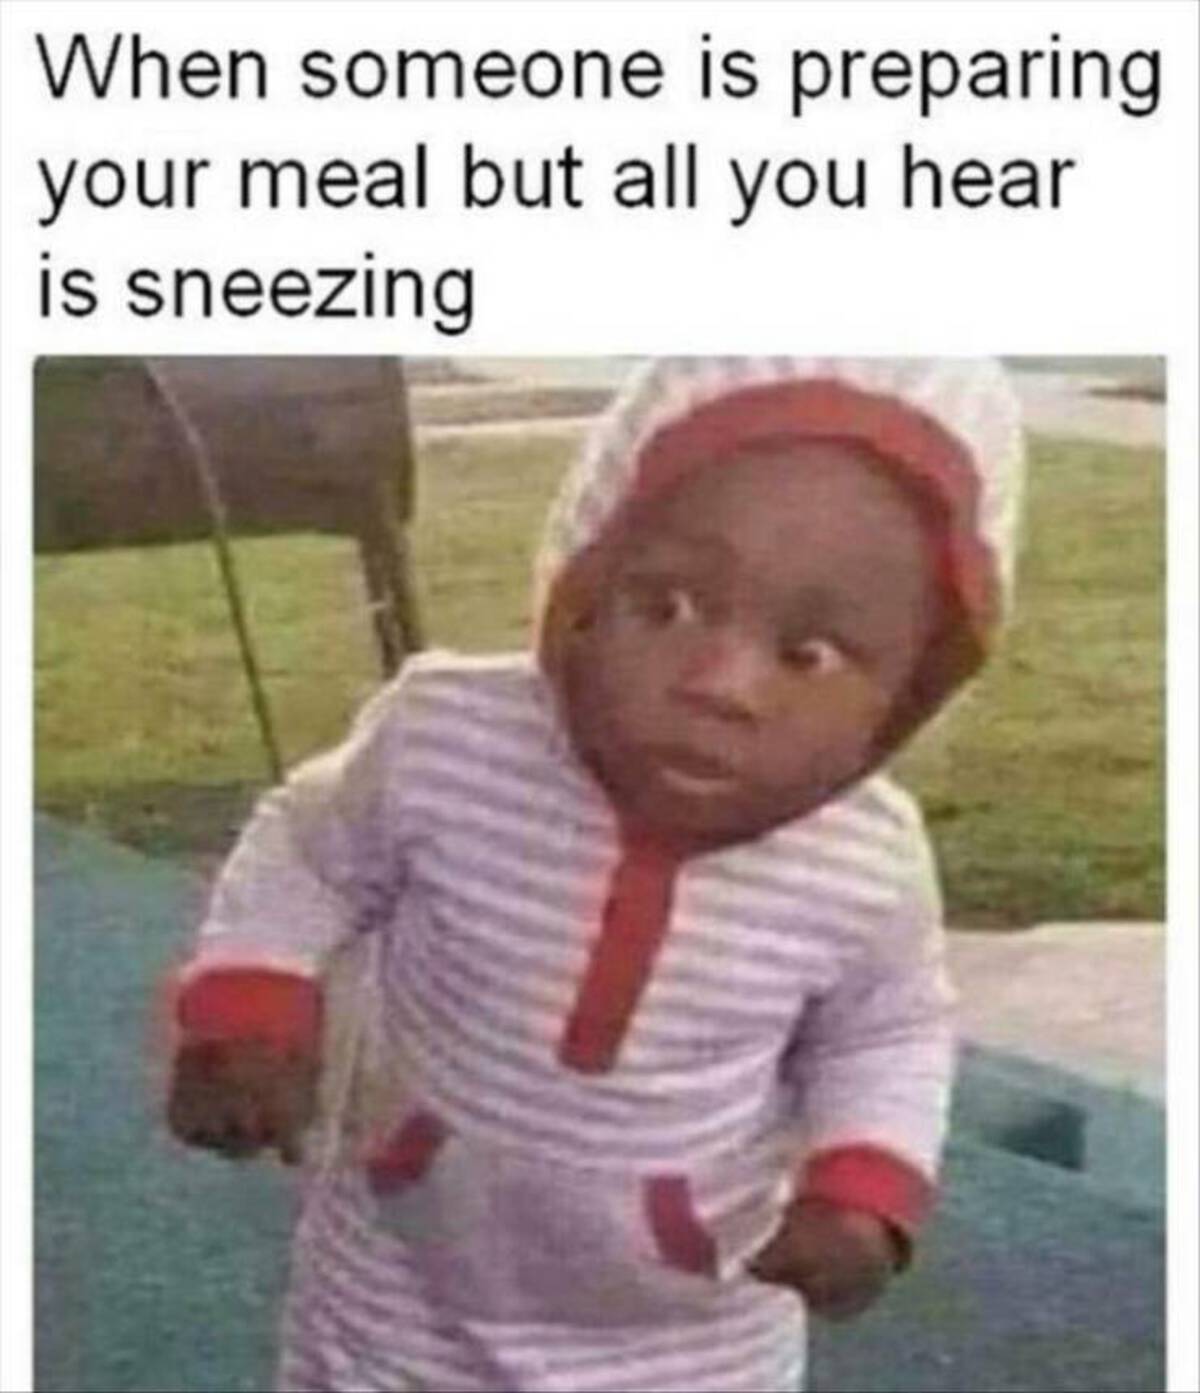 photo caption - When someone is preparing your meal but all you hear is sneezing